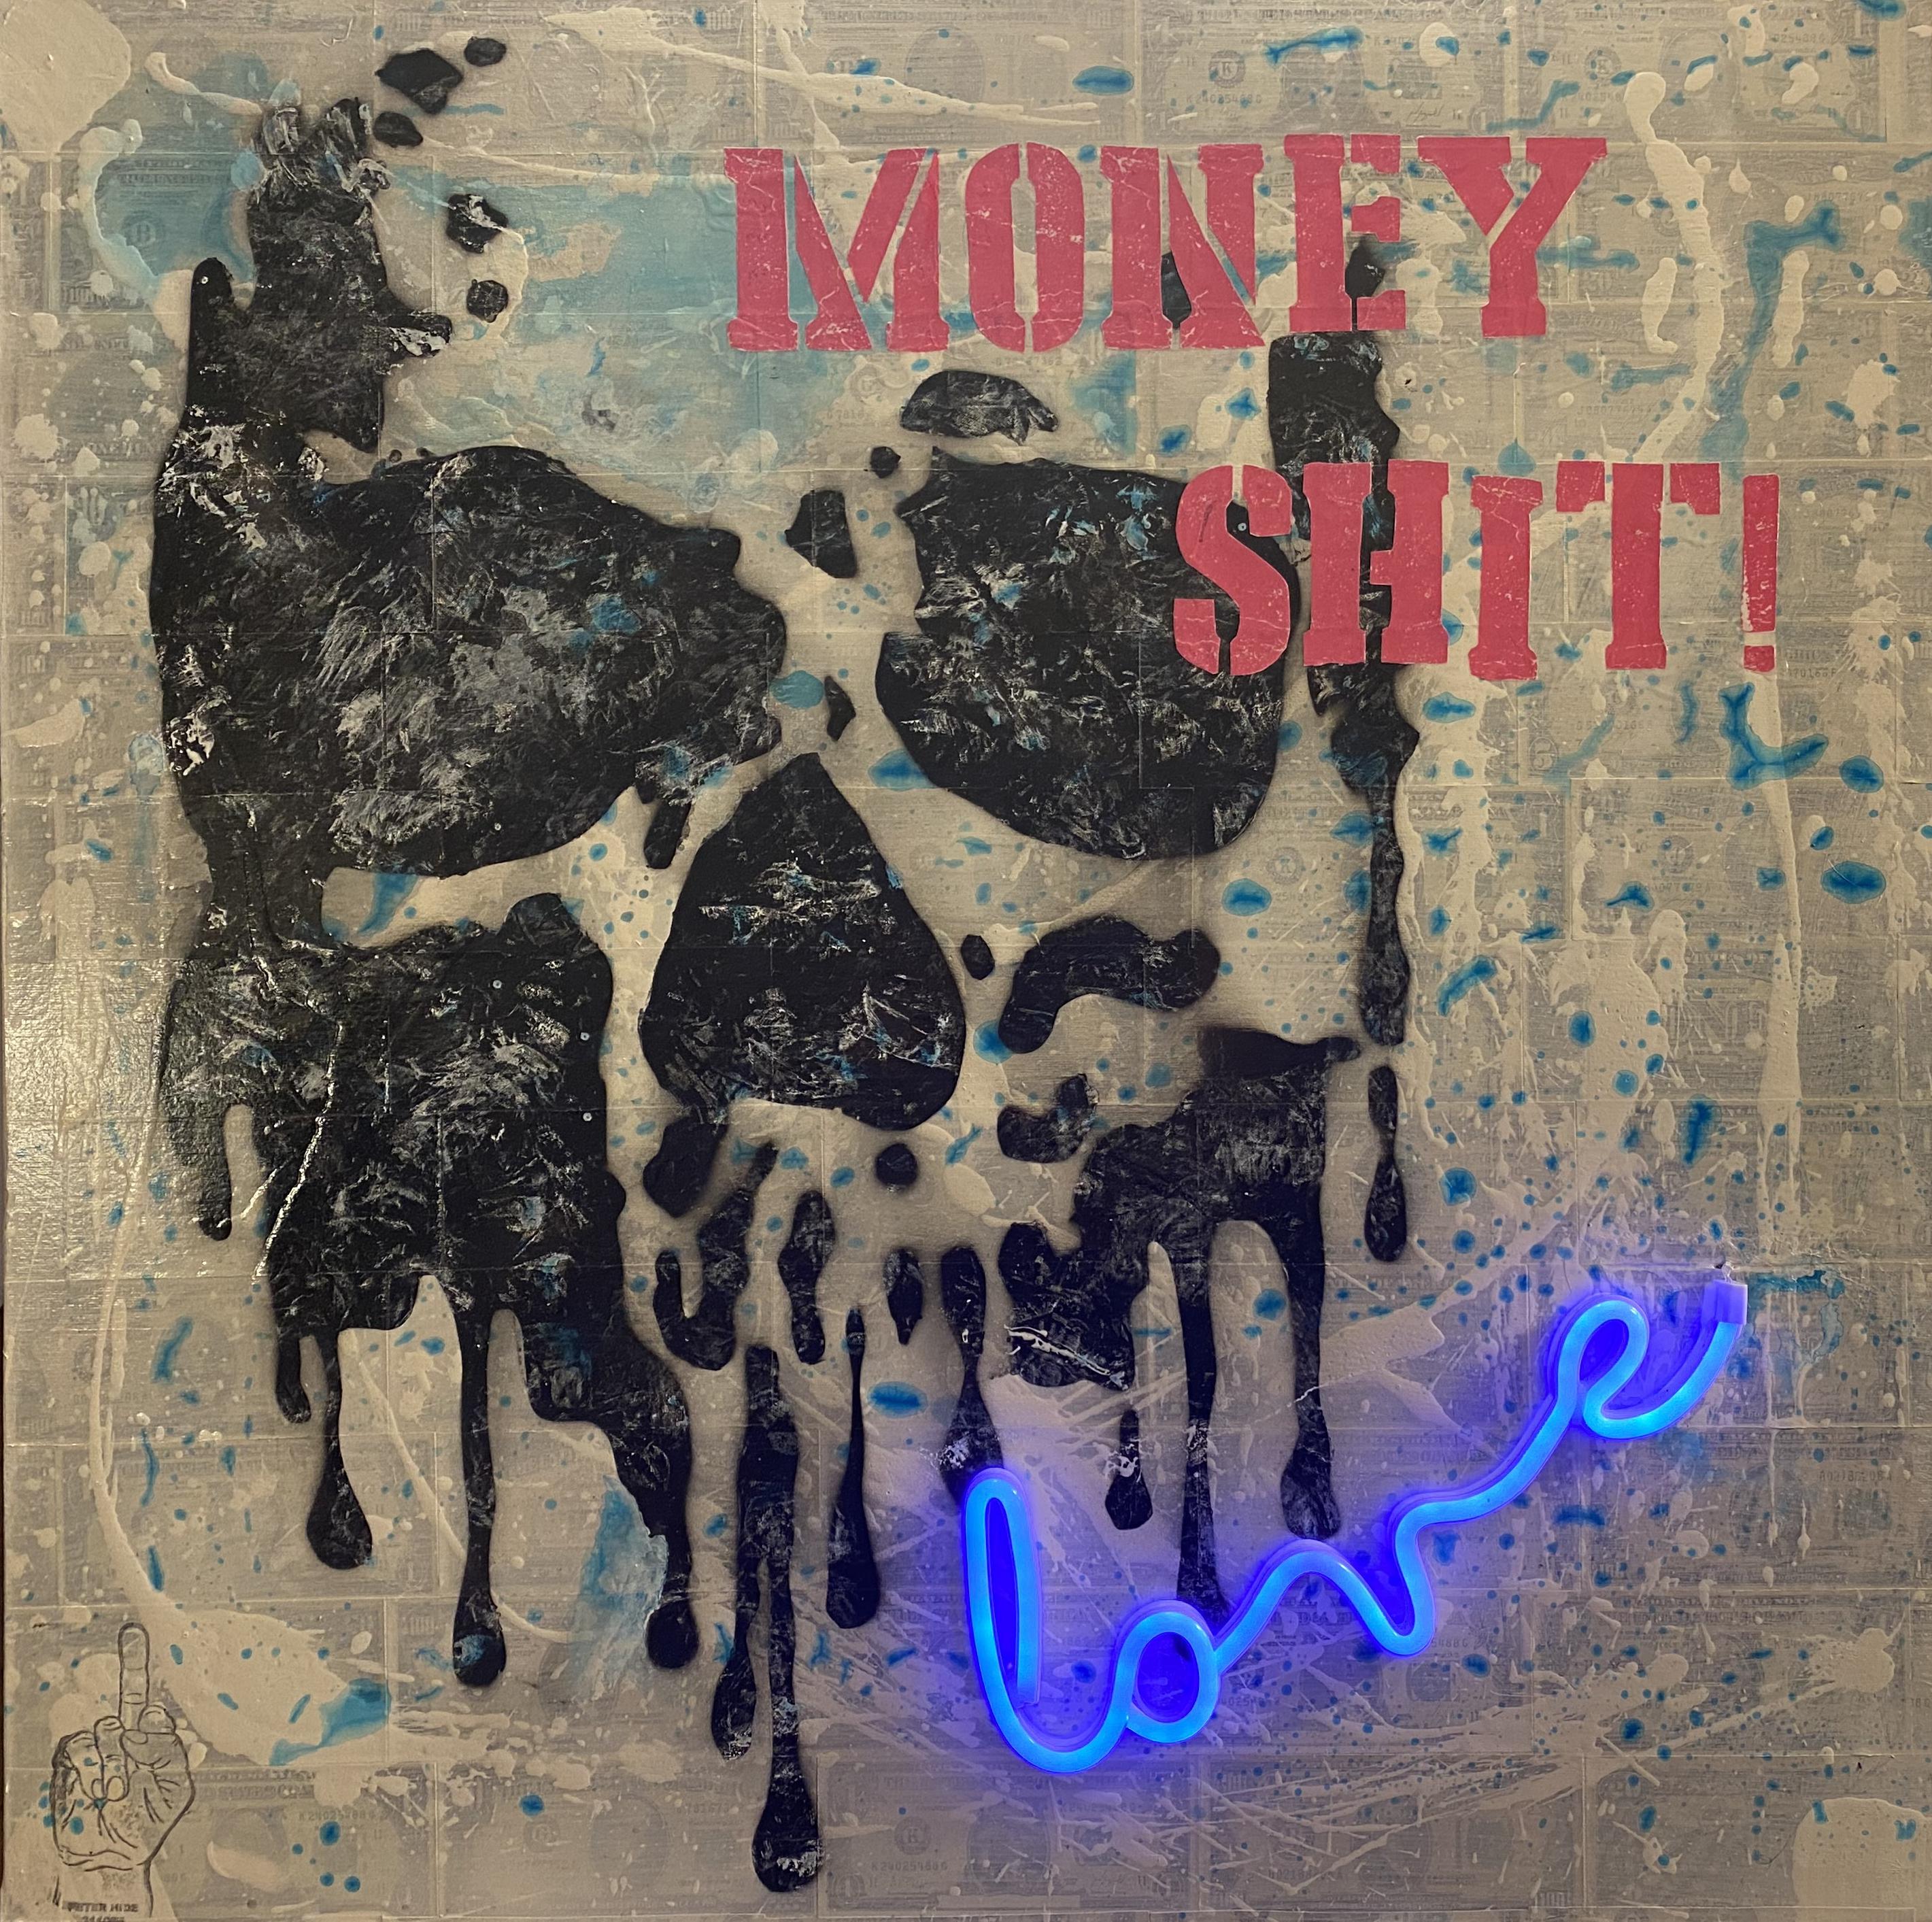 TITLE: Money shit! Love
ARTIST: Peter Hide 311065
YEAR: 2021
MEDIUM TYPE: Painting
MEDIUM/MATERIALS: Mixed media, banknotes, luminous neon effect on canvas
DIMENSIONS: 80 x 80 cm